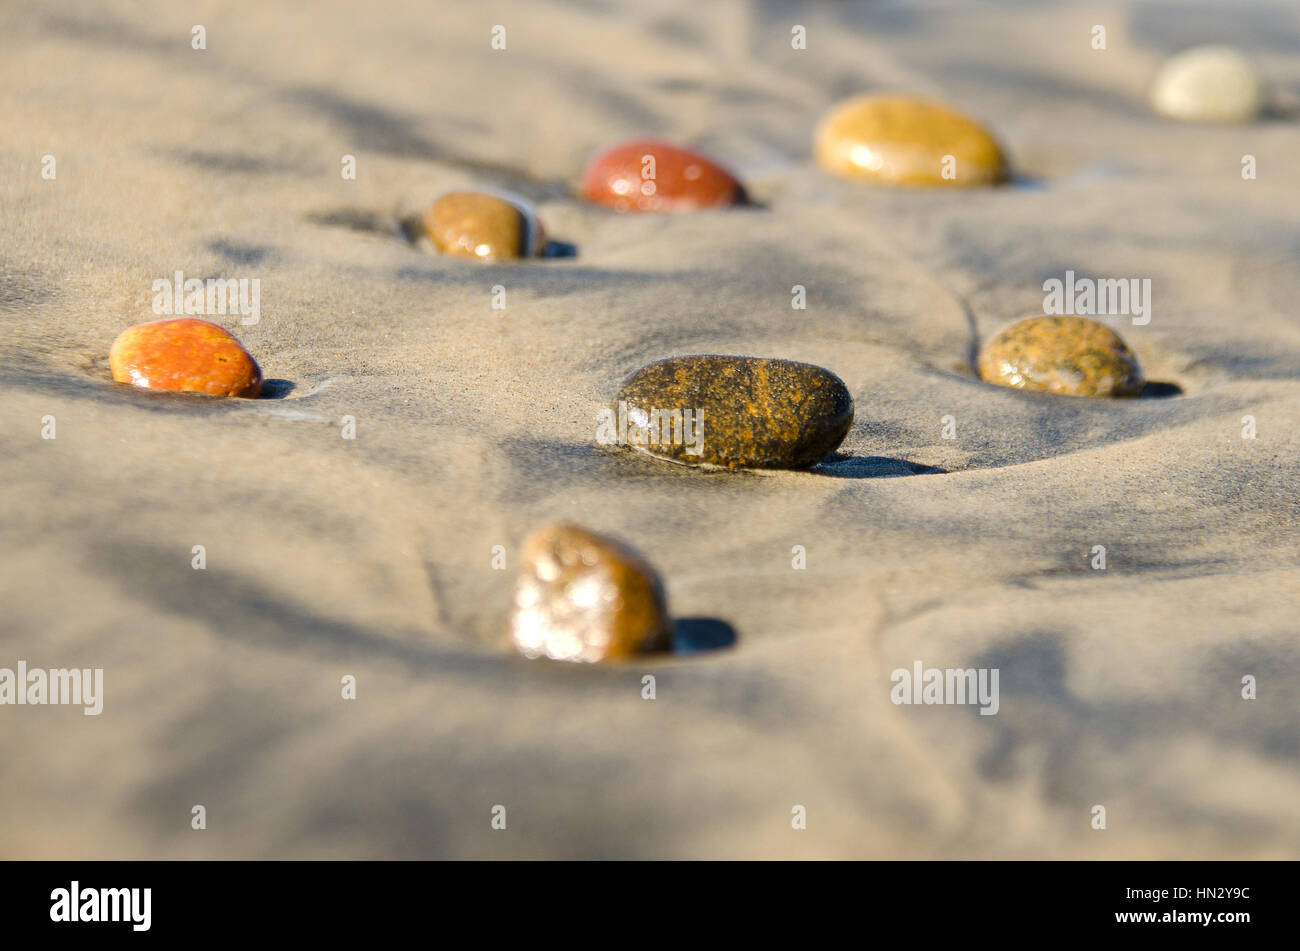 Pebbles stones on sand at the beach Stock Photo